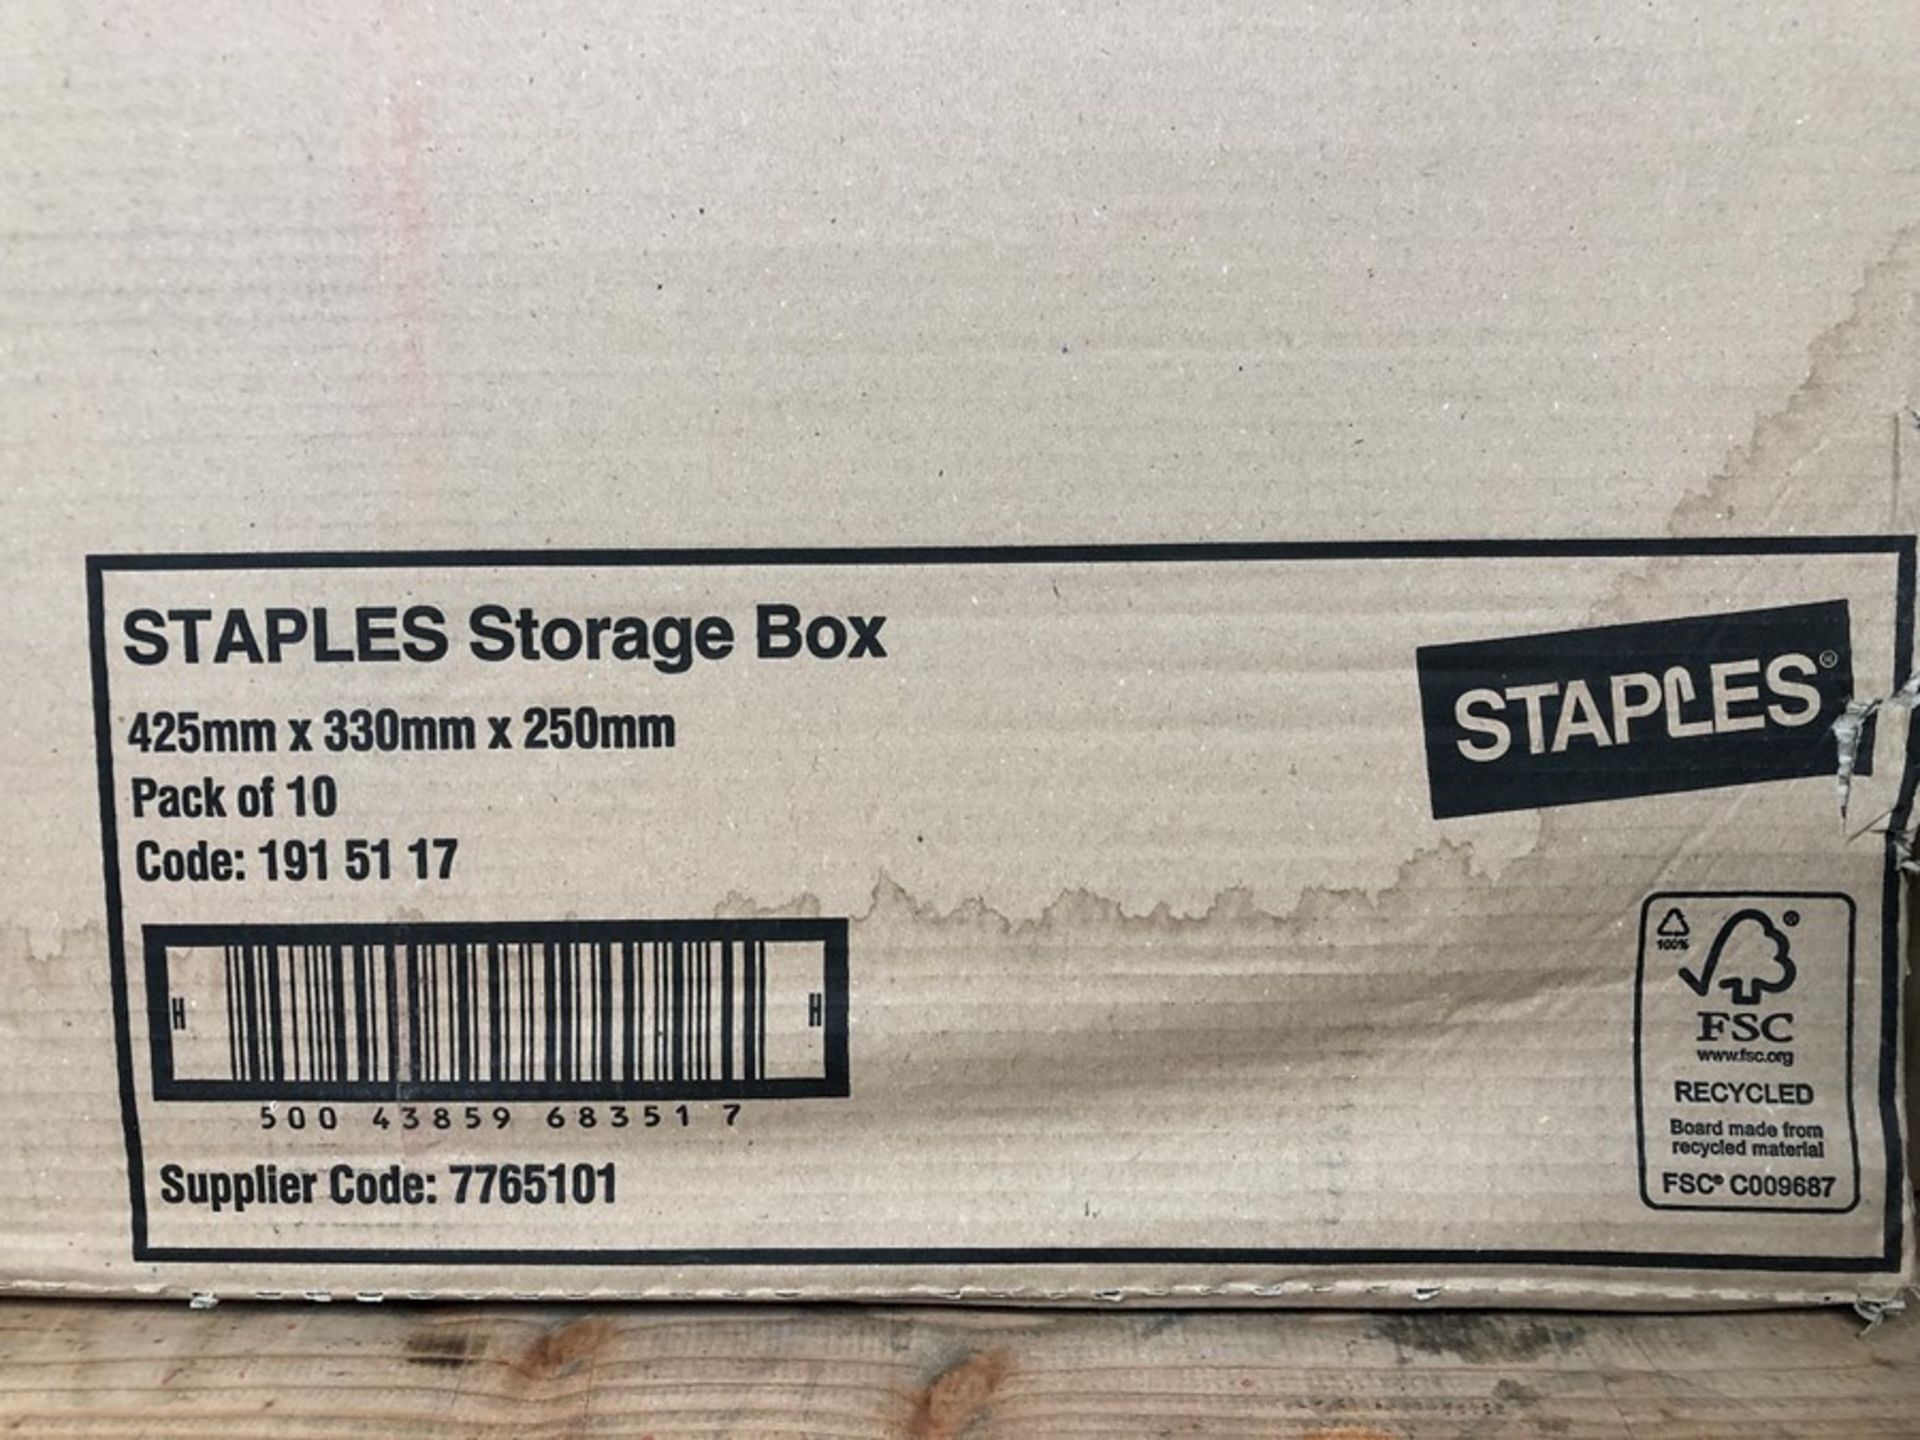 1 BOXED SET OF STAPLES STORAGE CARDBOARD BOXES - SET OF 10